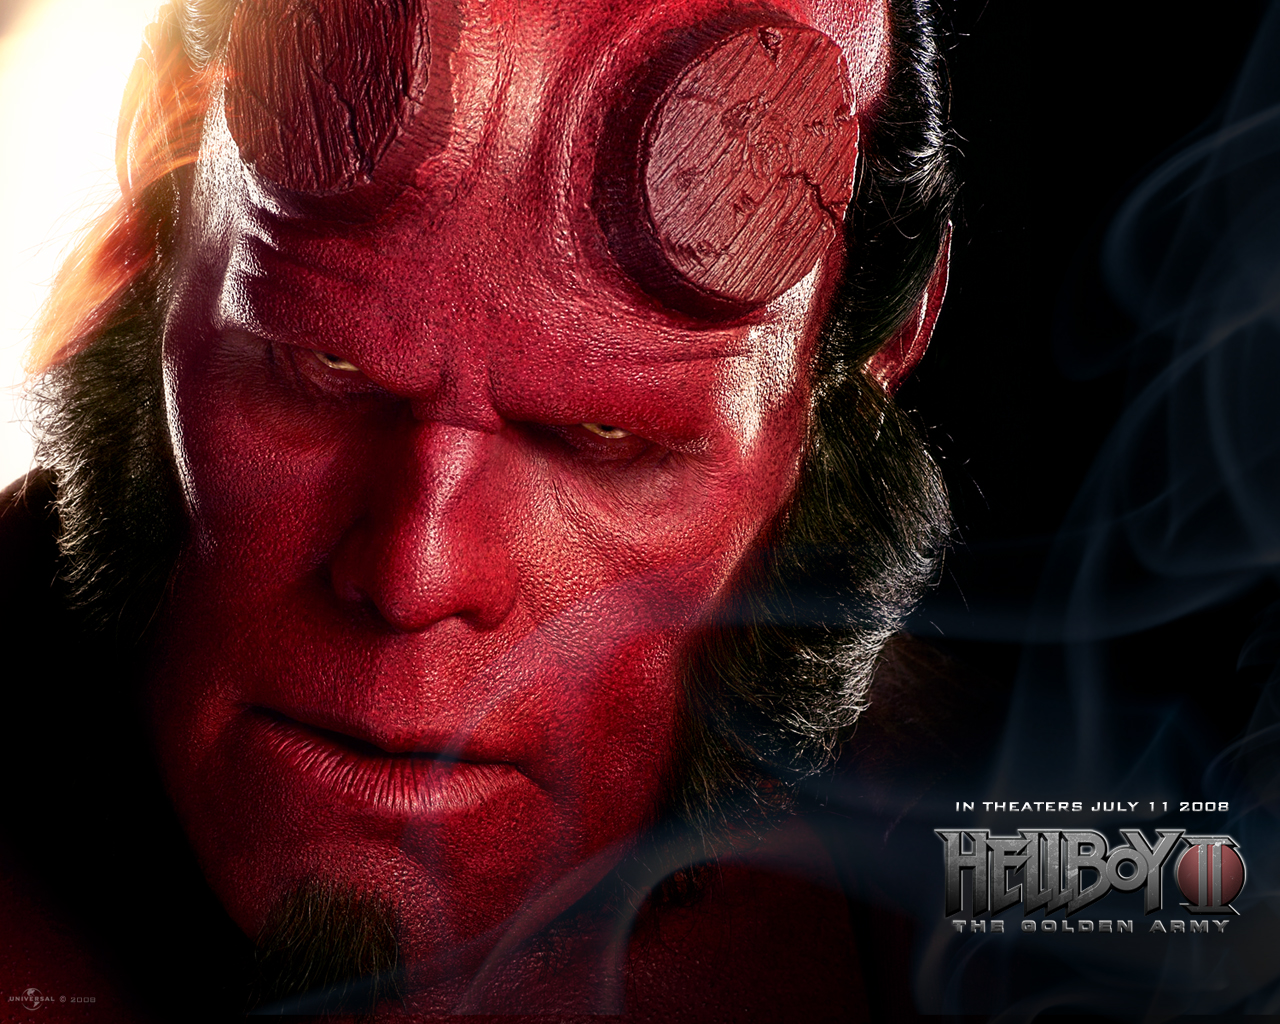 High Quality Hellboy The Golden Army Wallpaper Num